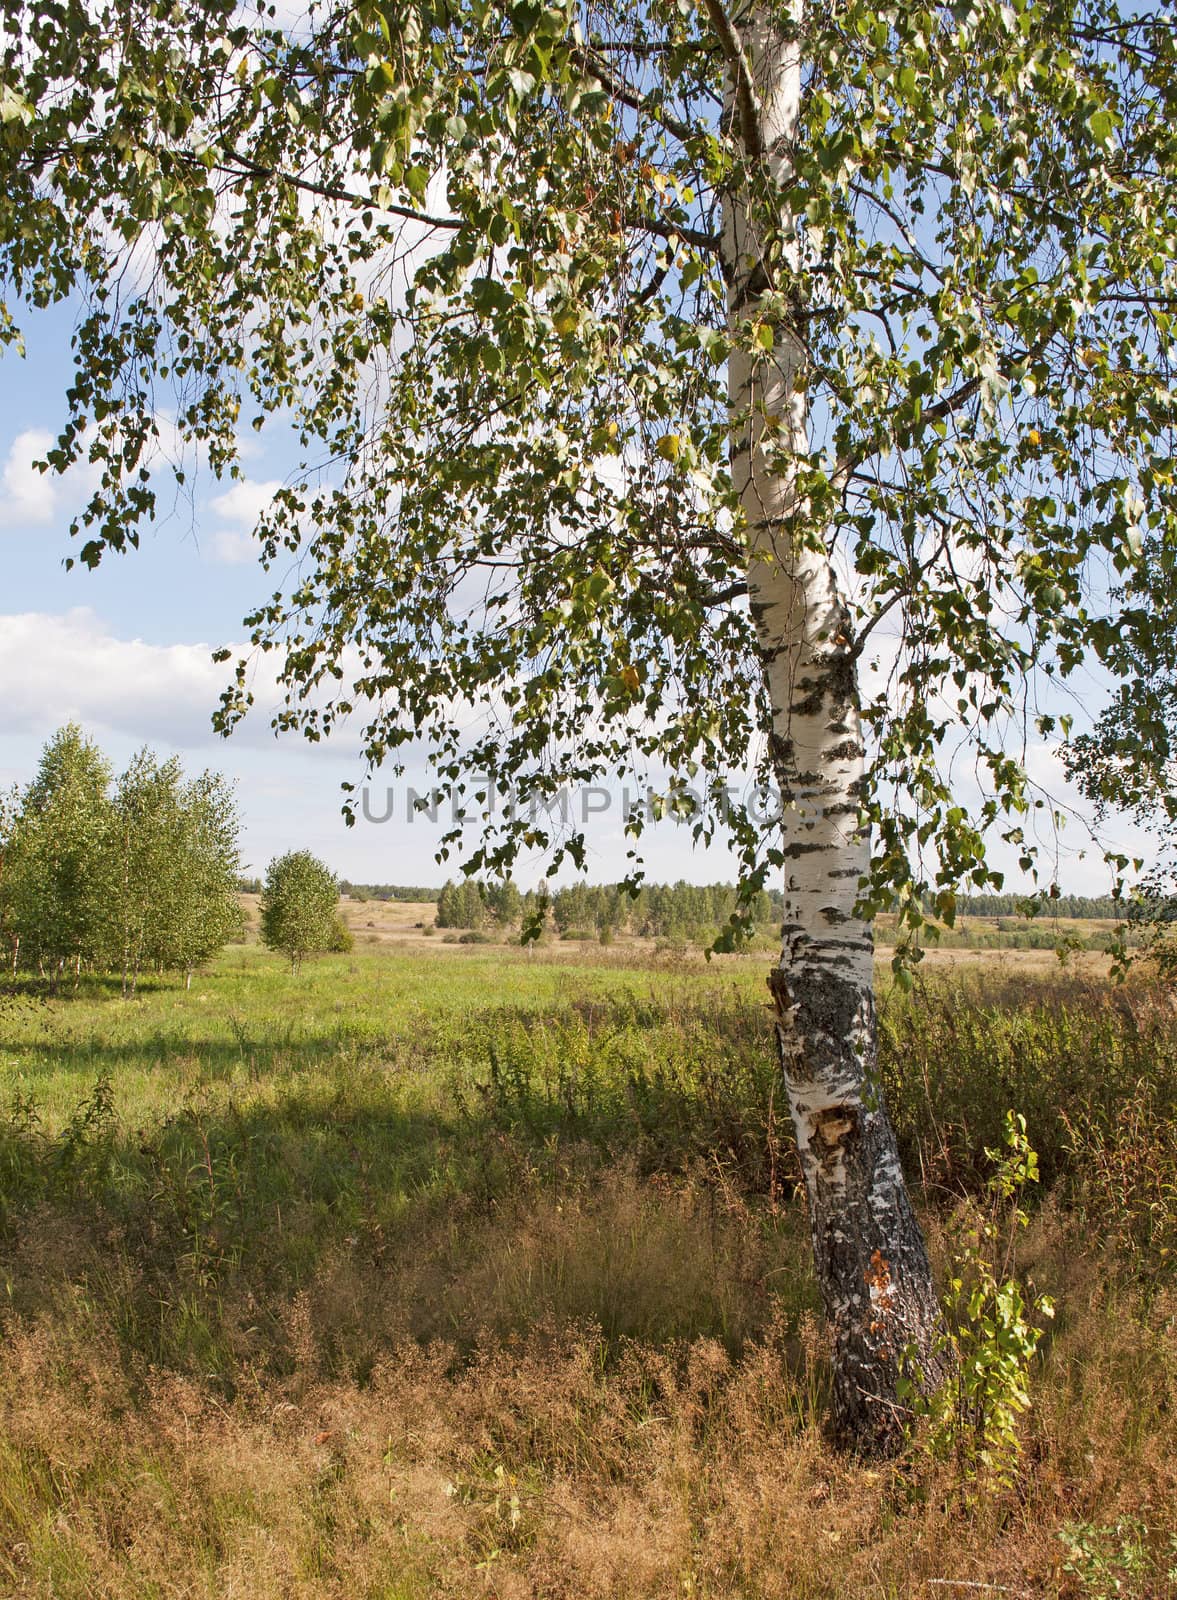 A lone birch tree on the edge of the field, sunny summer day